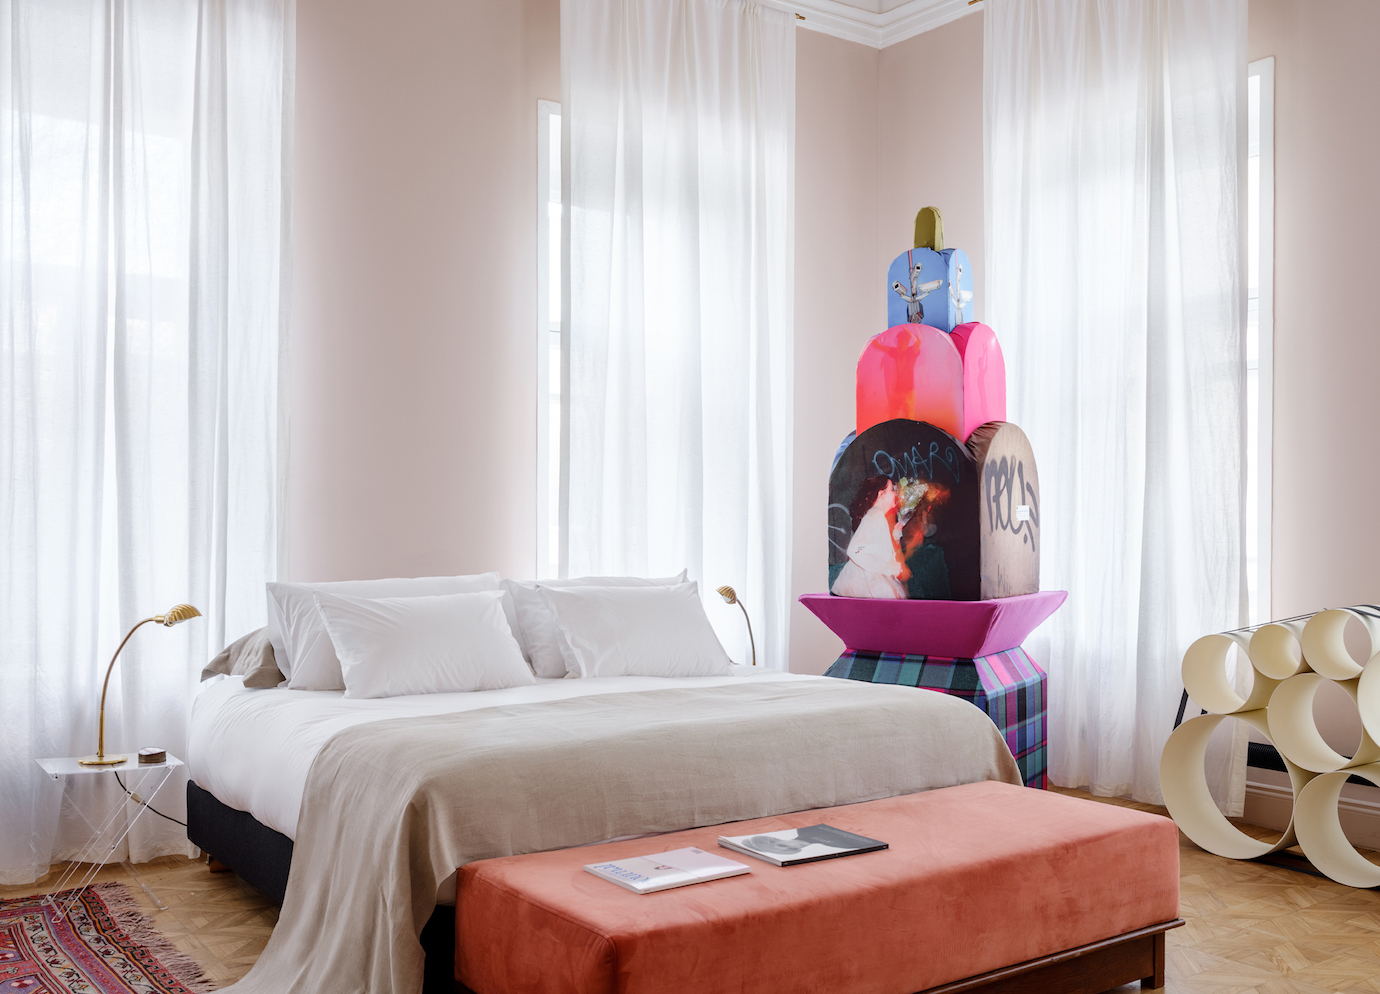 Explore Richter, a 5-star design hotel and creative space in a former Moscow mansion | The Escapist